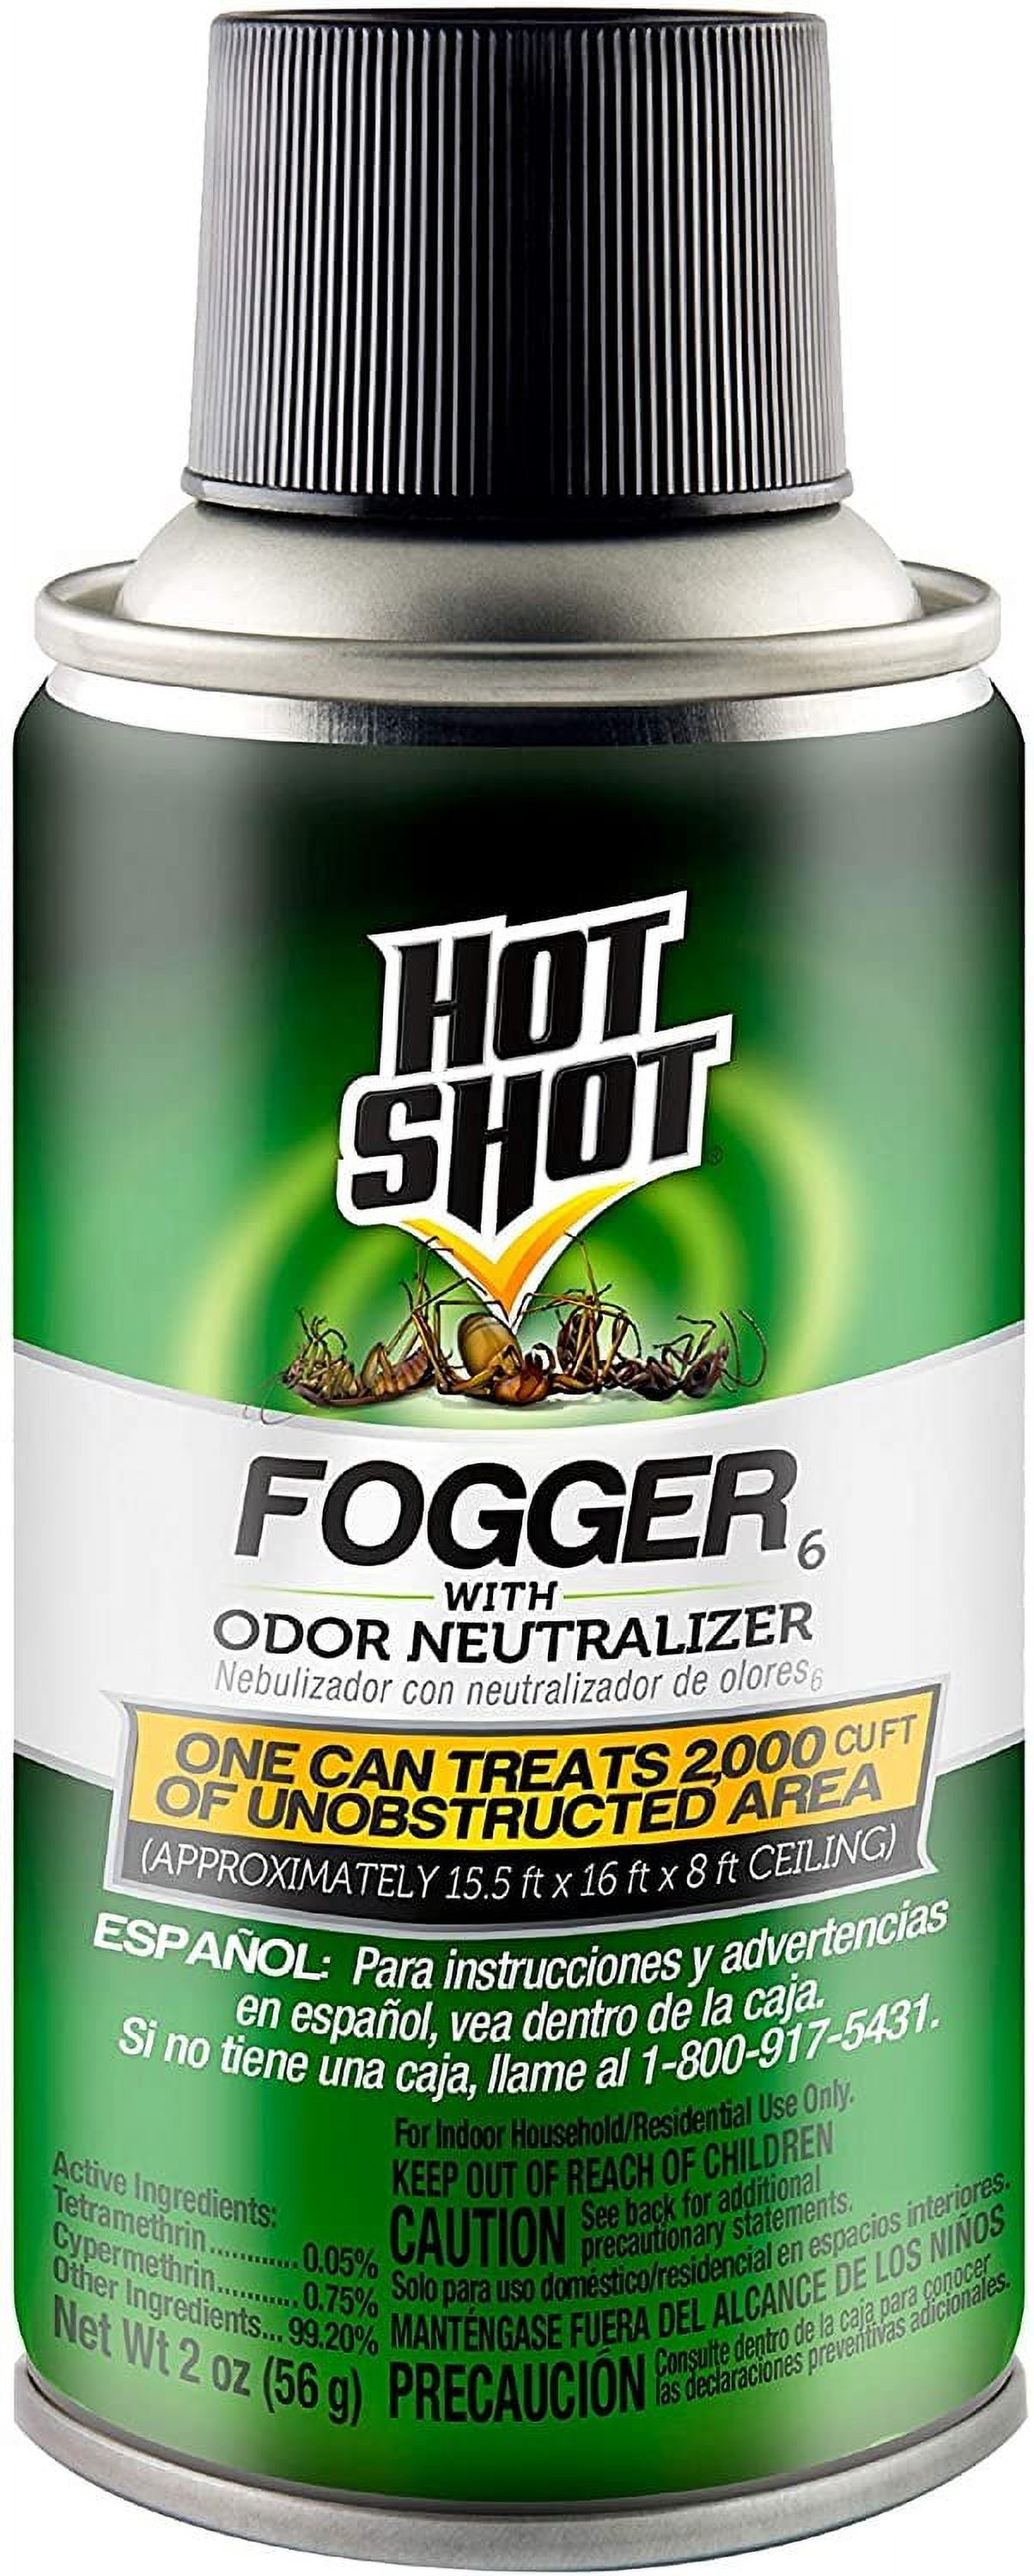 Hot Shot Pest Control Fogger with Odor Neutralizer, Kills Roaches, Ants, Spiders 3 Packs - image 3 of 11